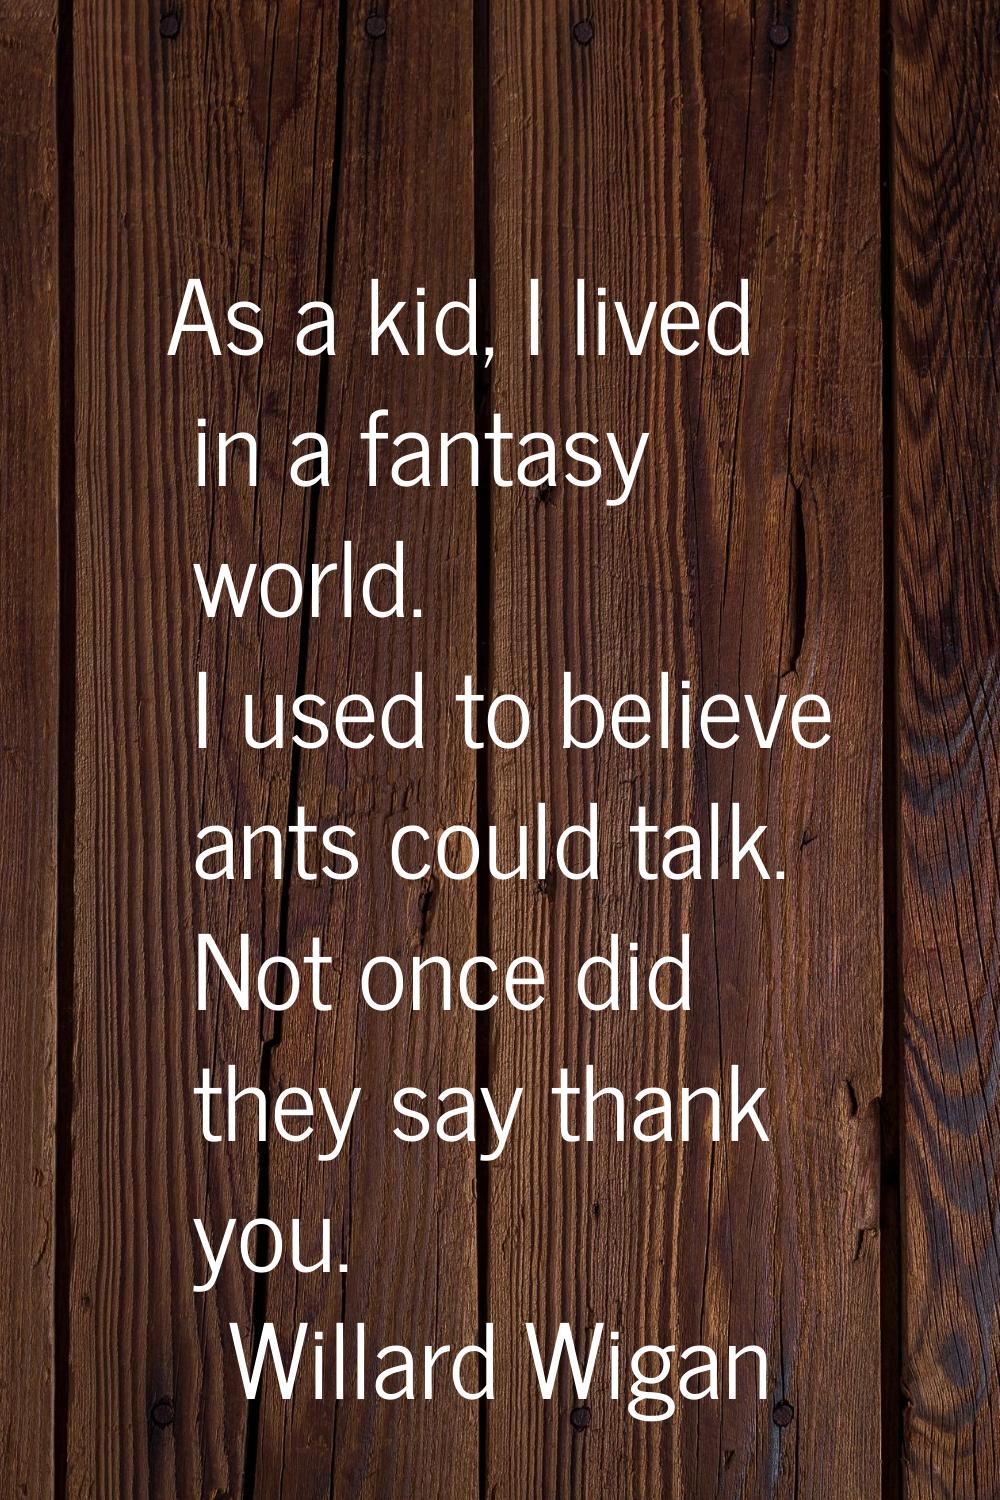 As a kid, I lived in a fantasy world. I used to believe ants could talk. Not once did they say than